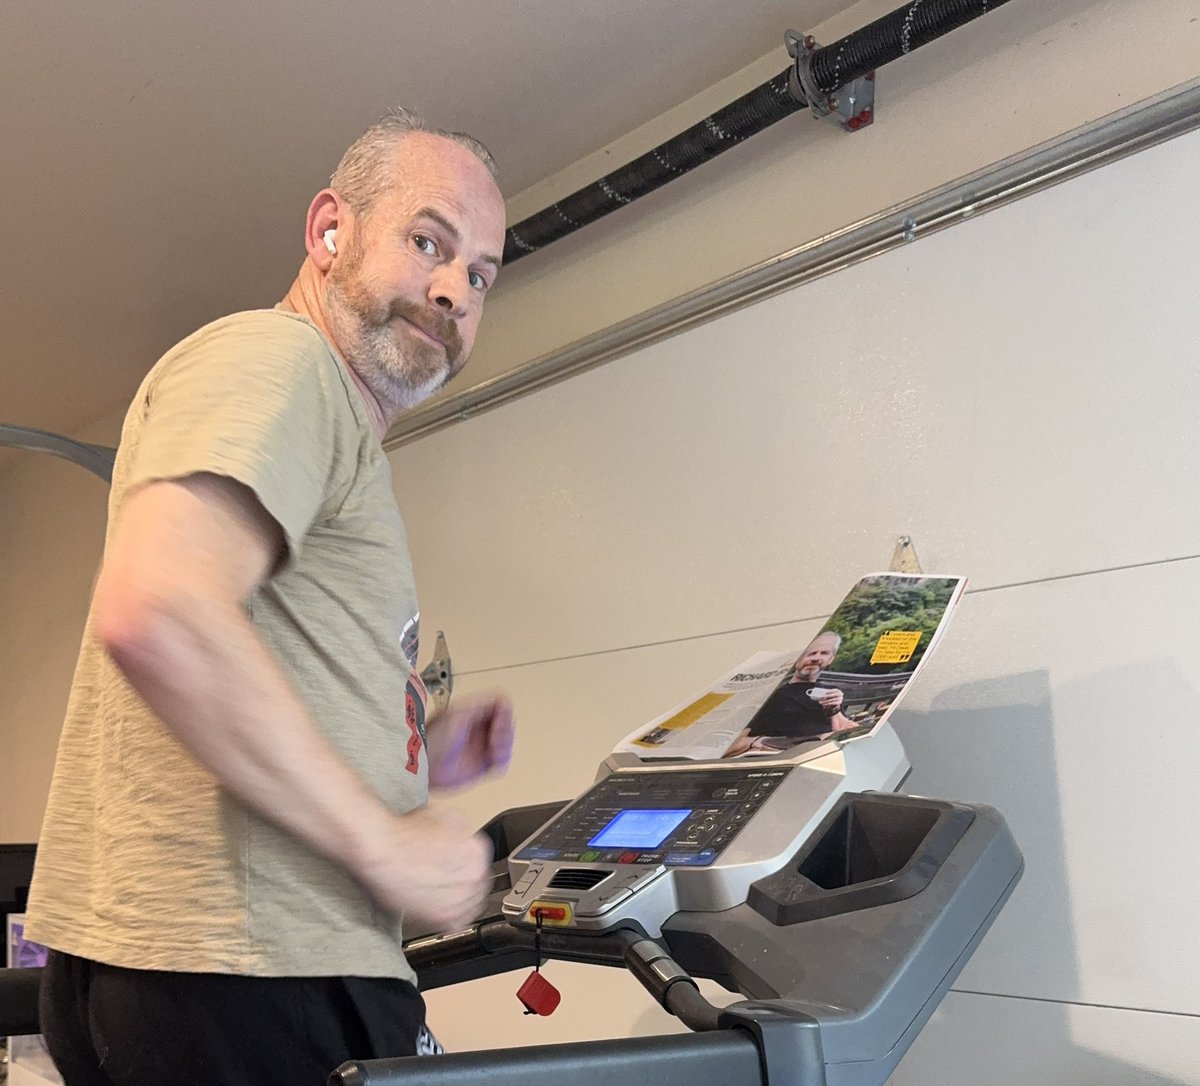 Exercise. Nobody loves it, but everyone should do it. Development is a young persons game and I have to keep on my toes for shows. A quick run while reading interviews with me in @RetroGamer_Mag keeps me fit as a fiddle. #gamedev #gamedevelopment